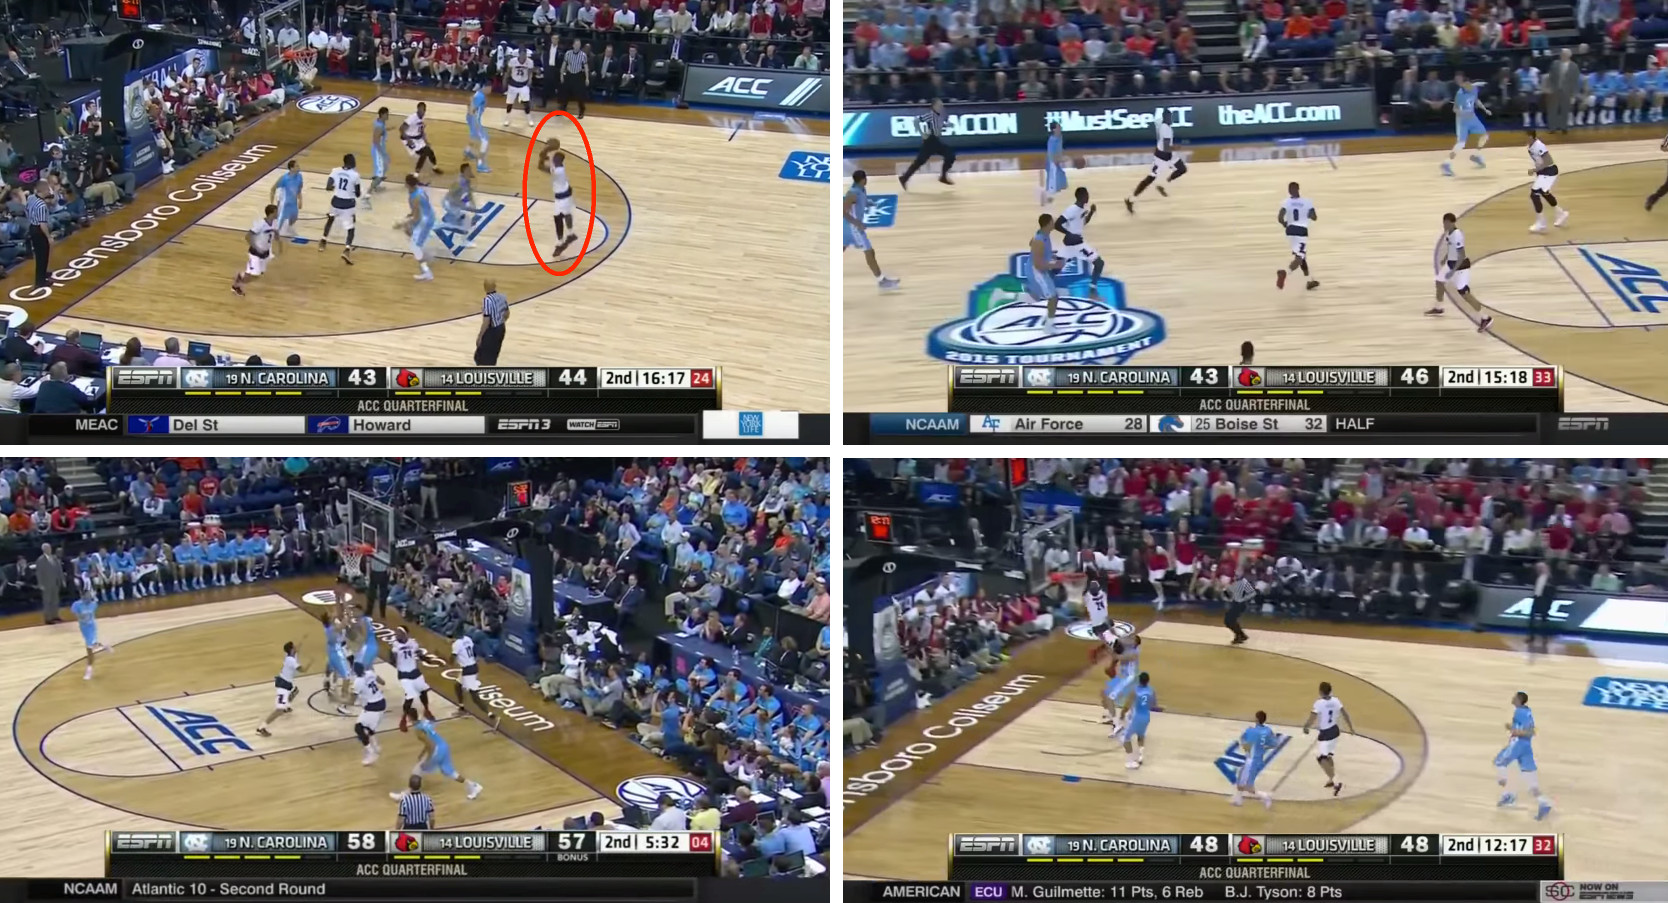 Leveraging Contextual Cues for Generating Basketball Highlights